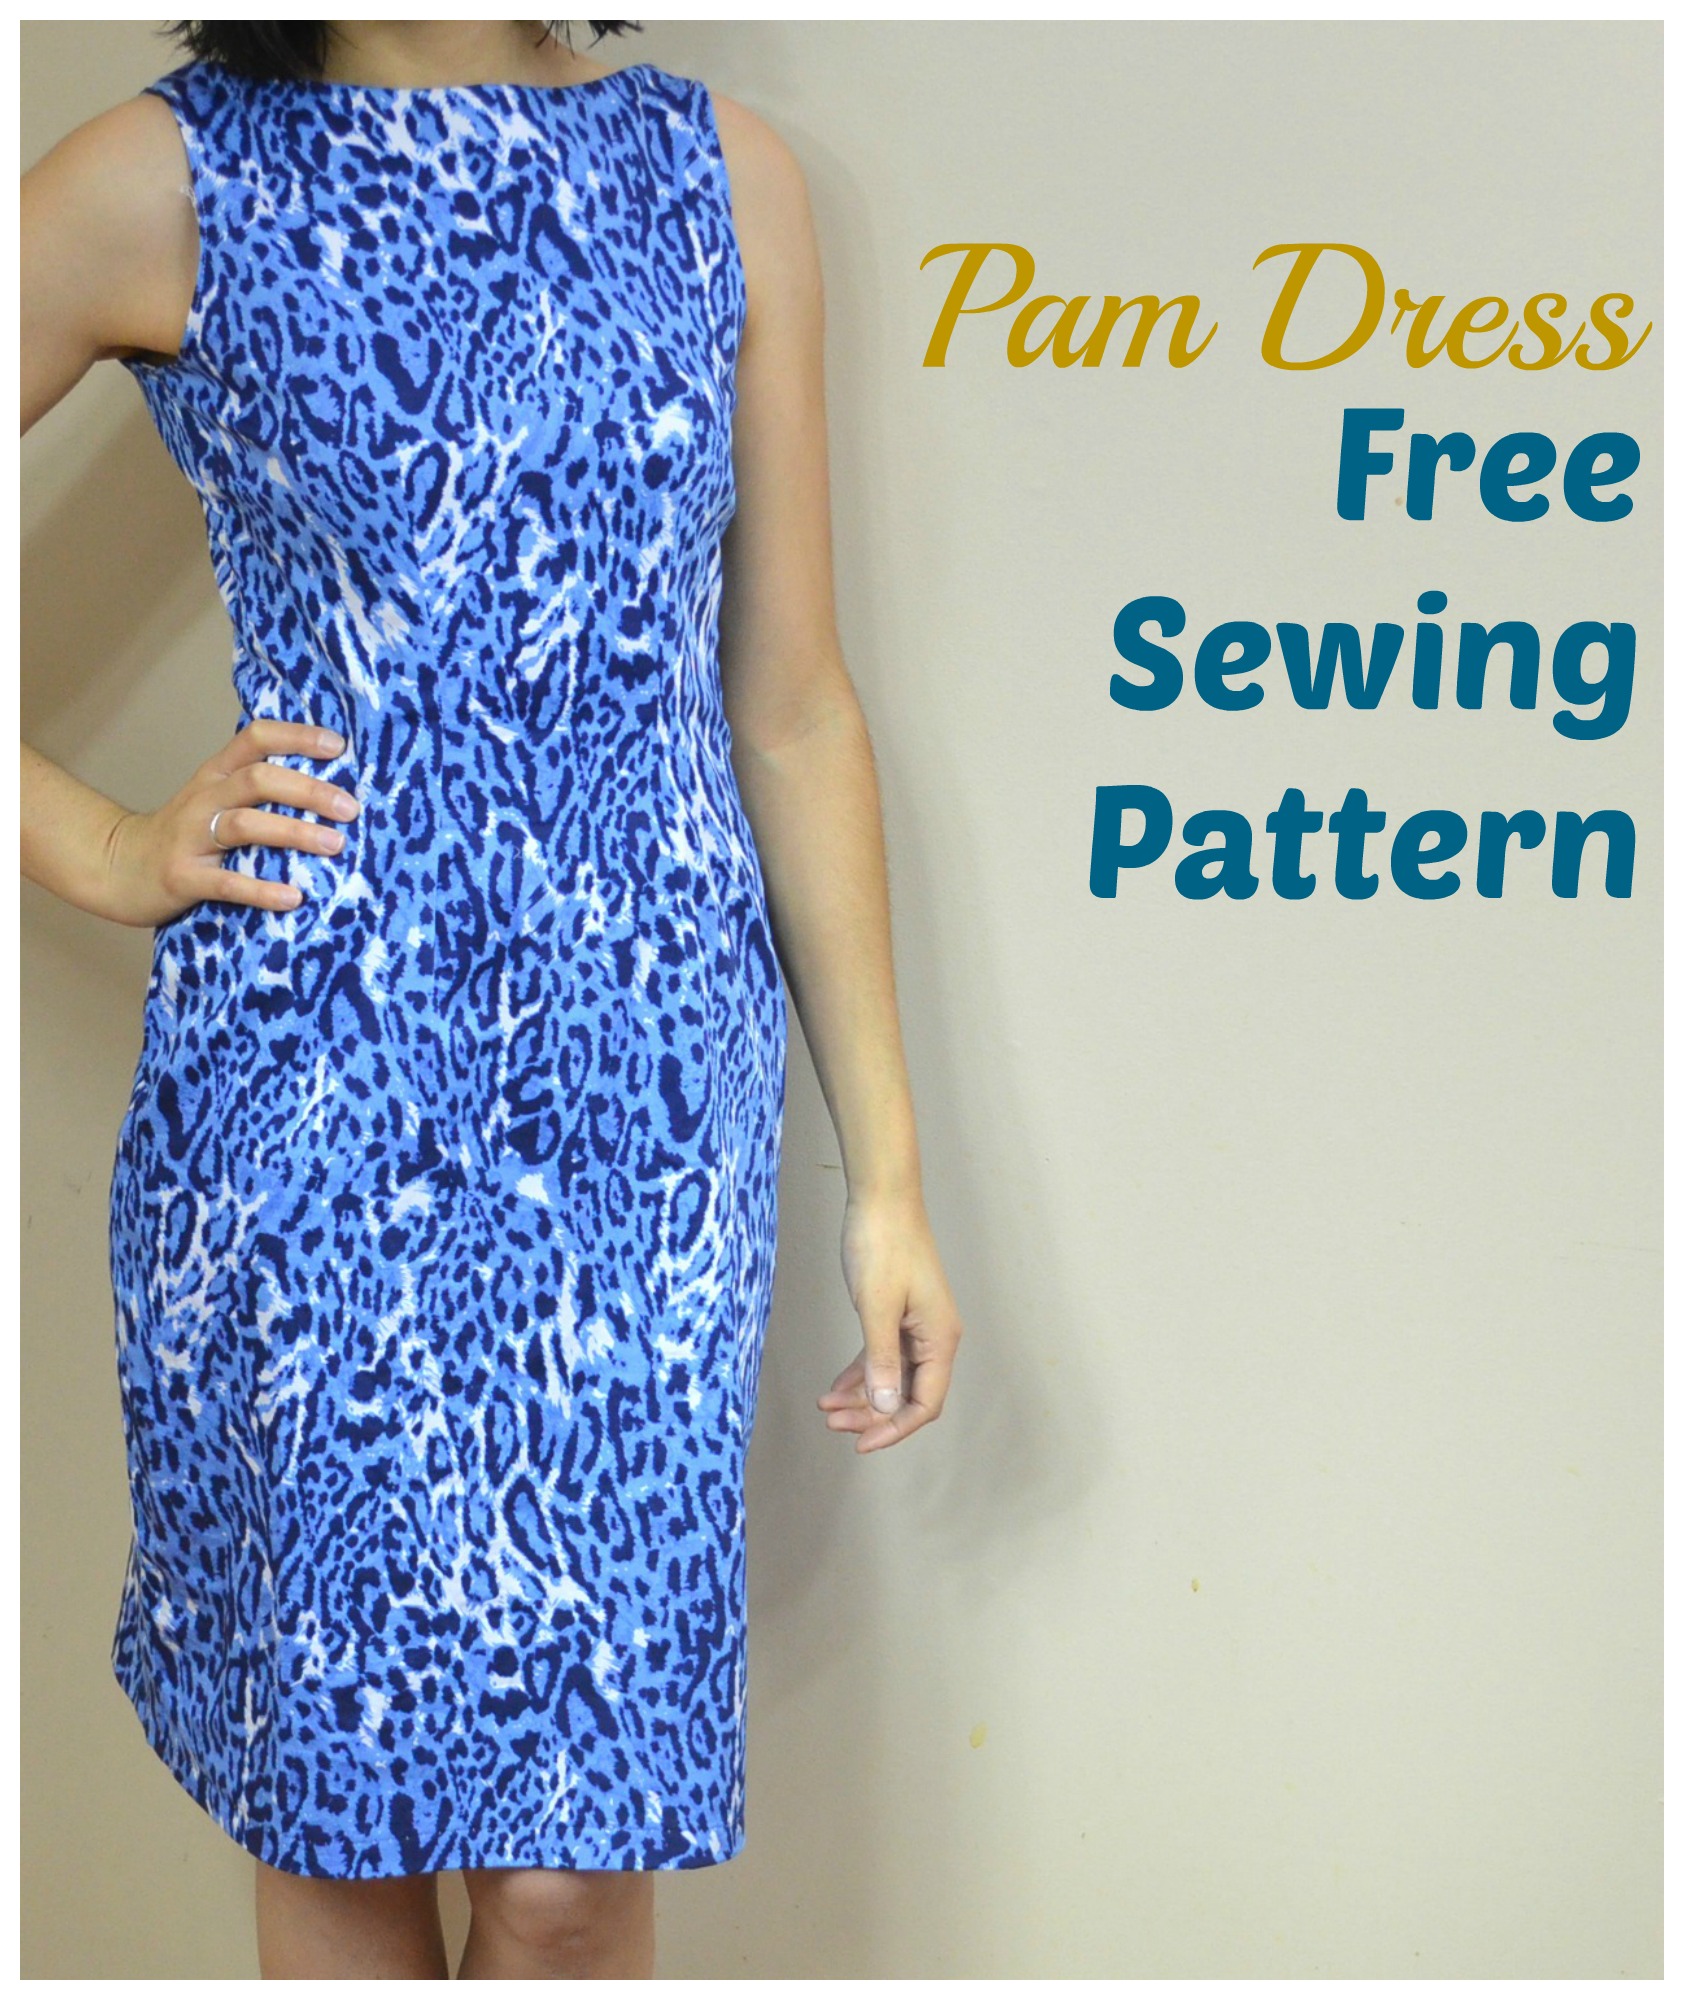 Pam Dress Free Sewing Pattern Sewing Projects BurdaStyle